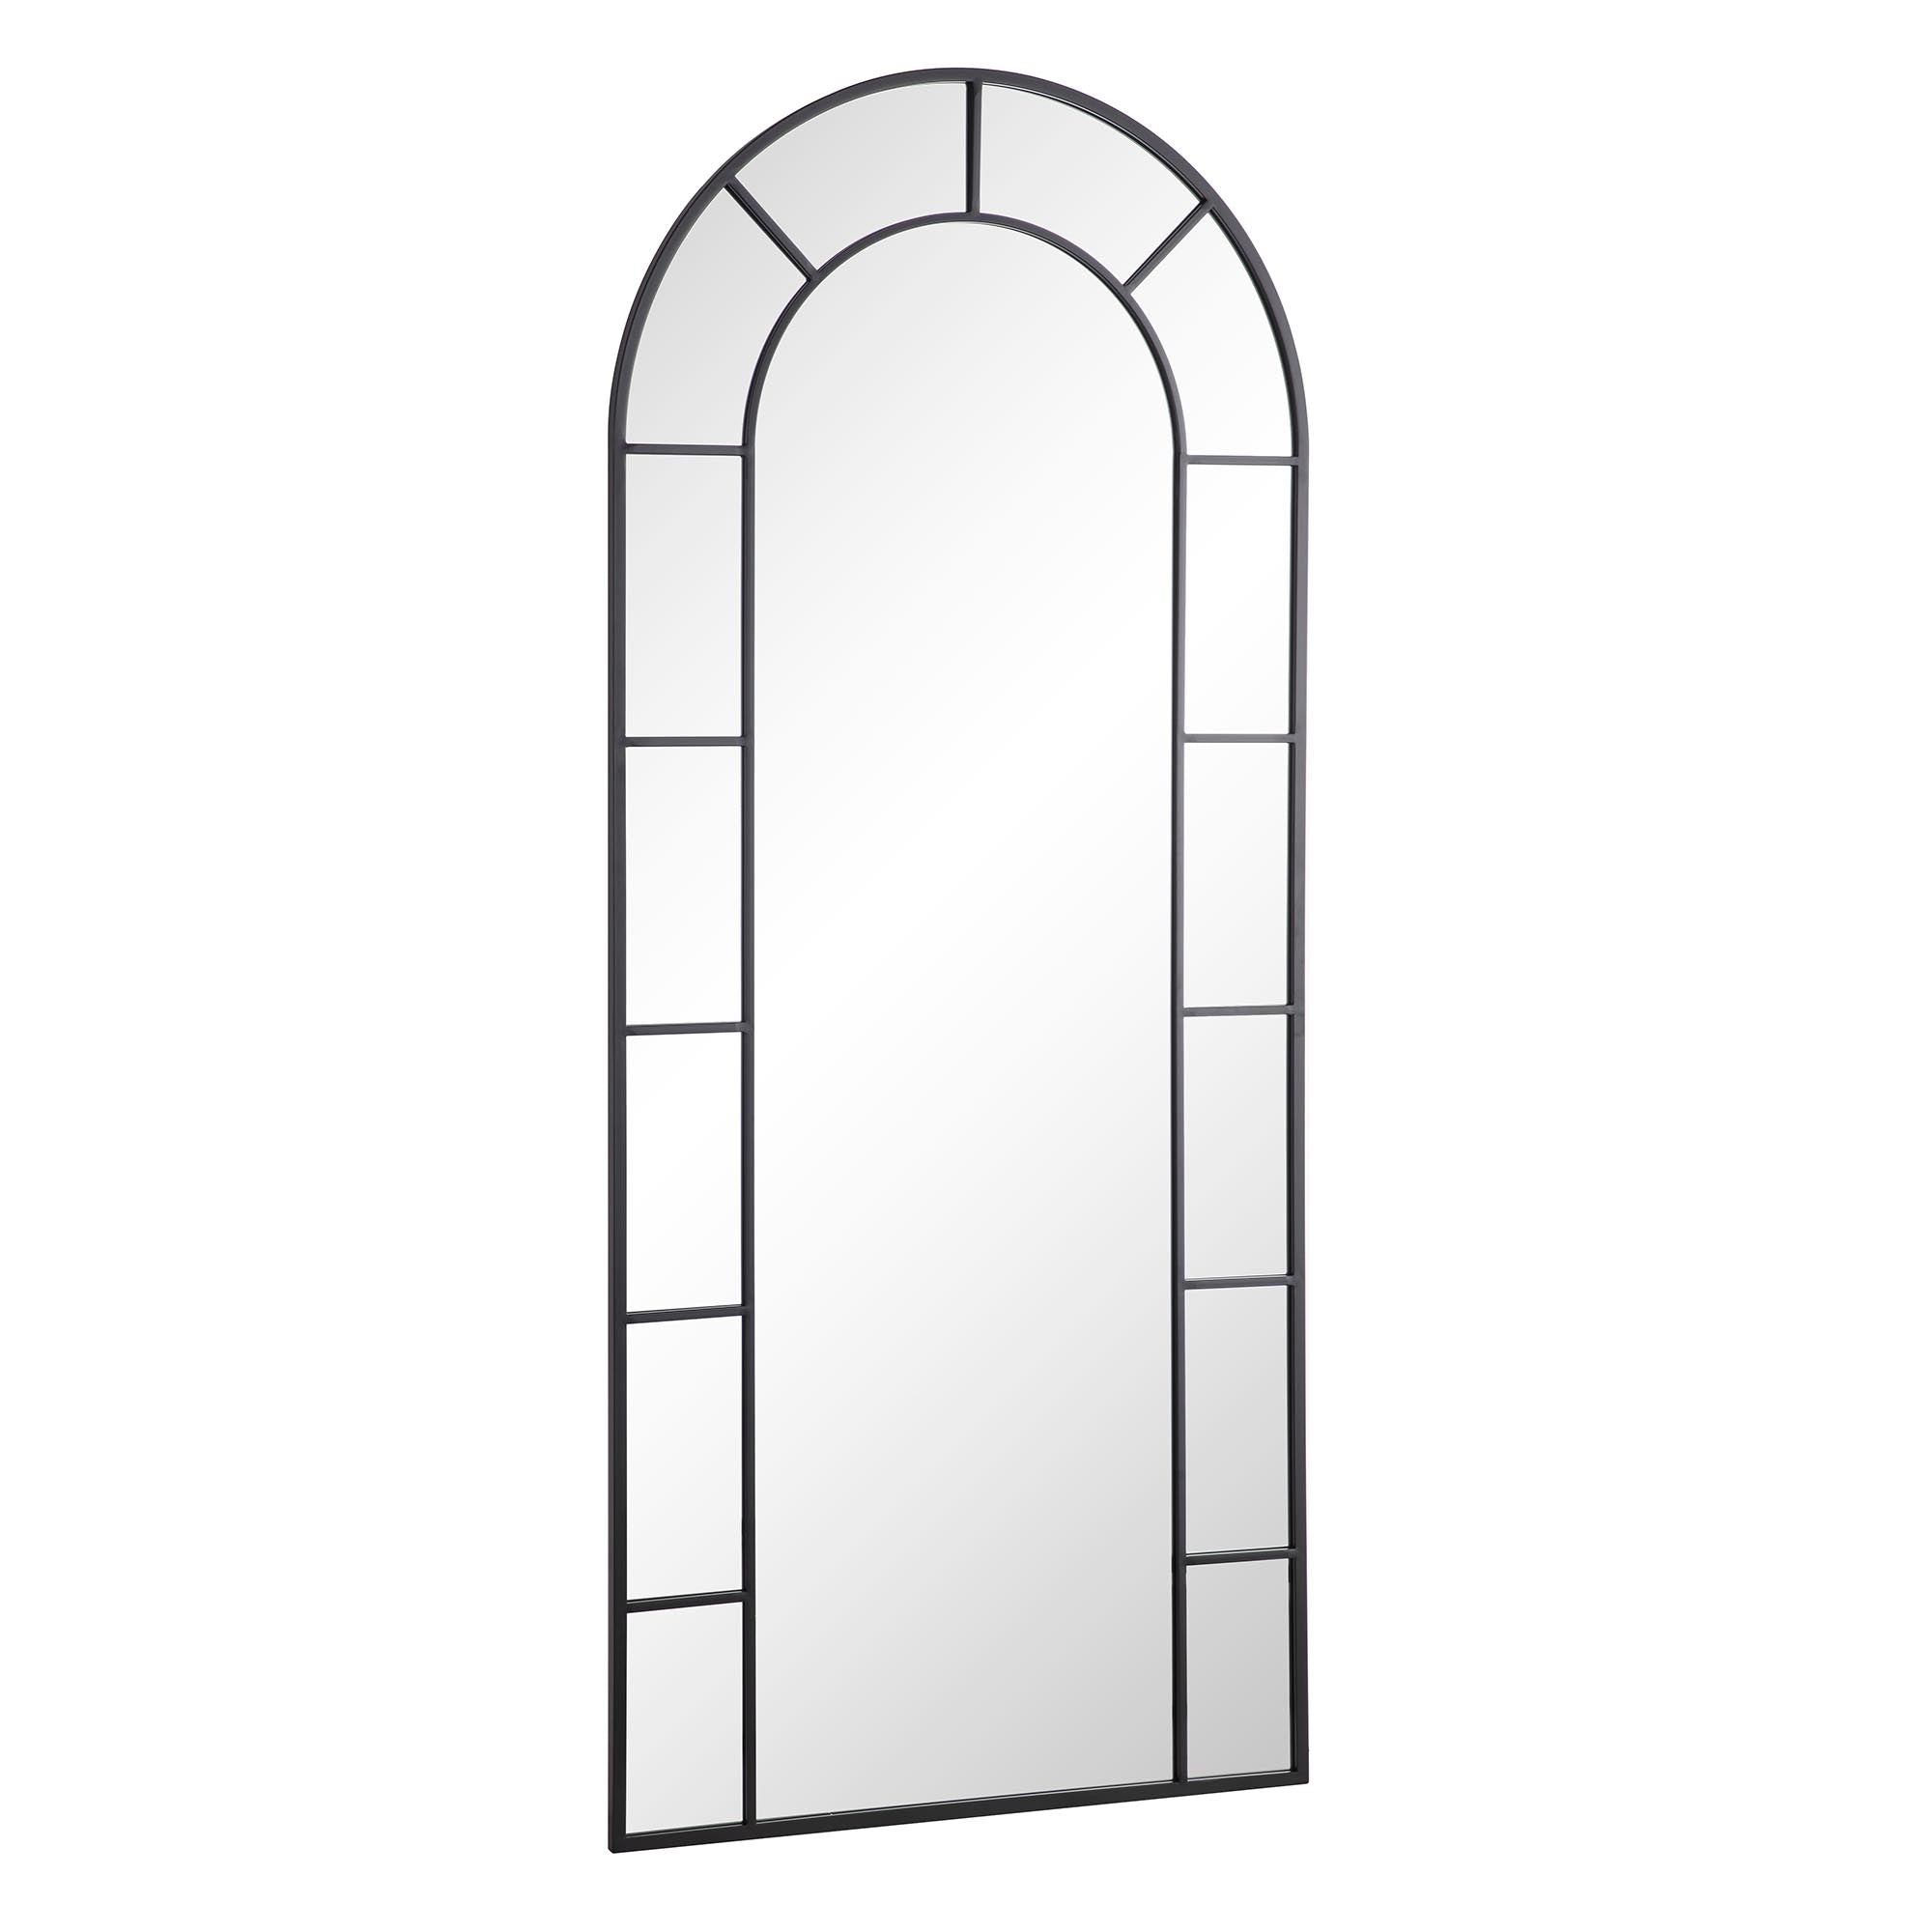 Beaumont Arched Full Lenth Metal Frame Mirror 178 x 76 cm, Black